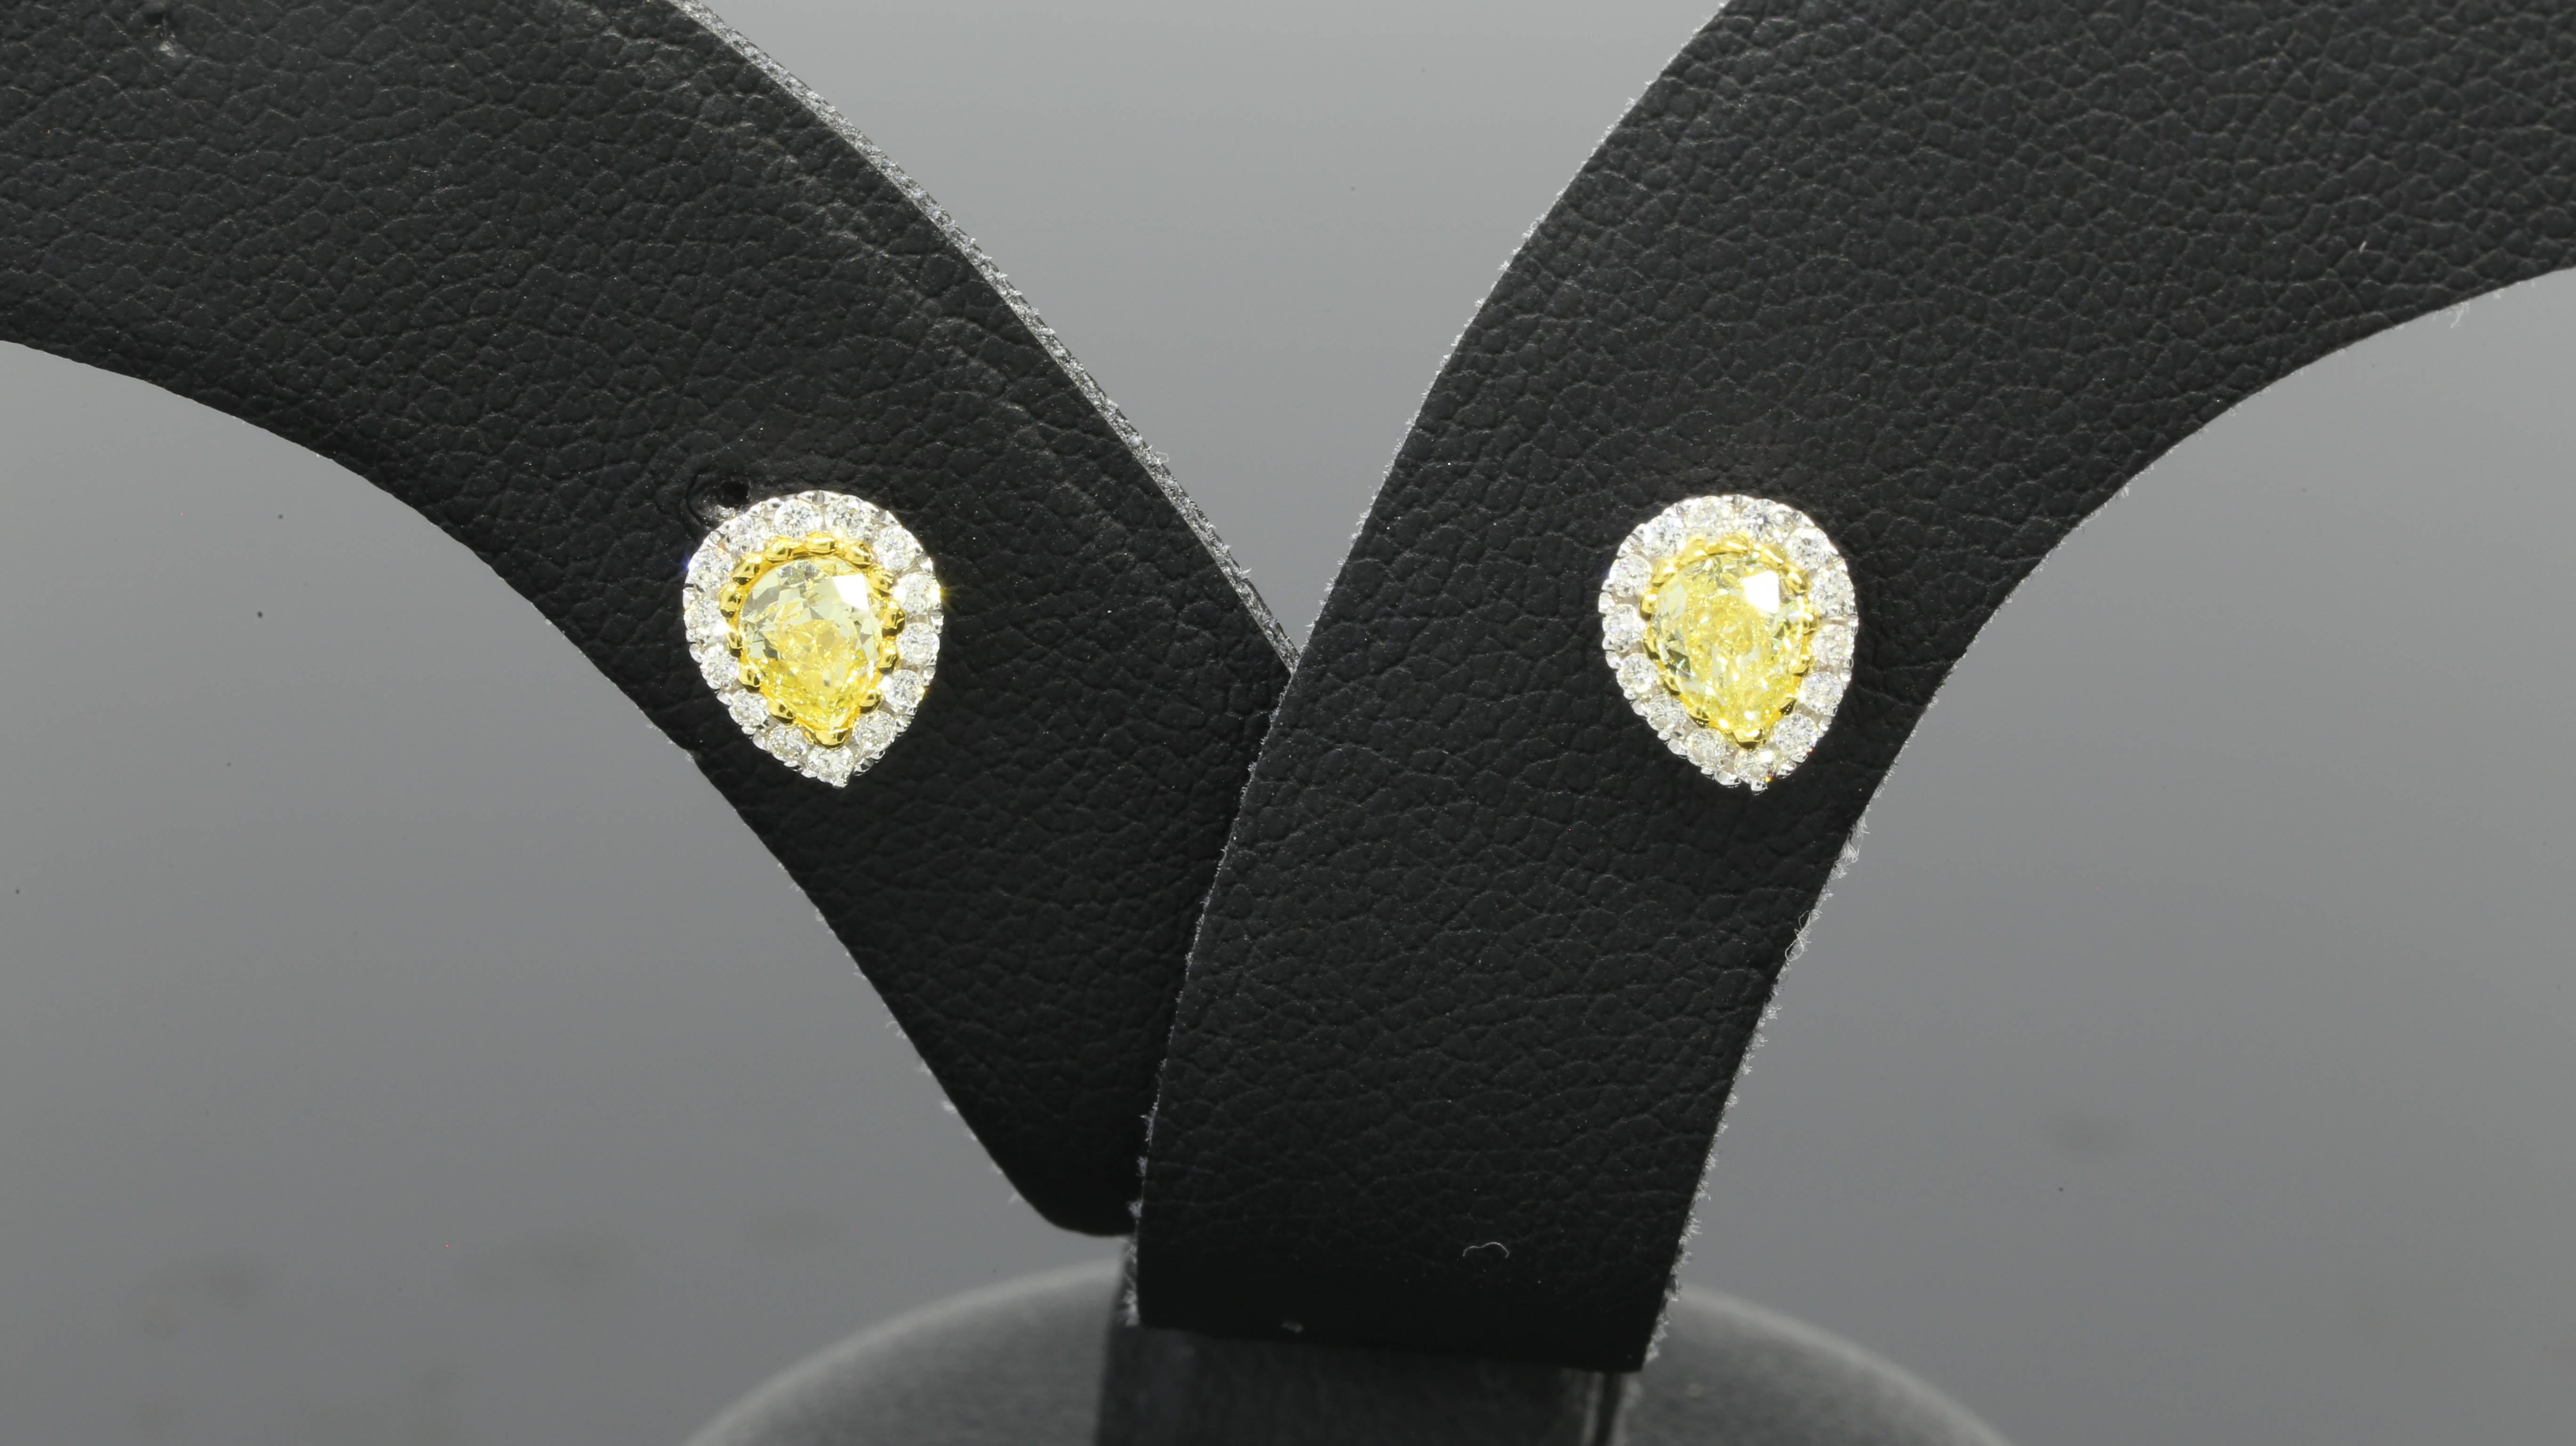 These sparkly earrings feature two pear brilliant cut, canary diamonds weighing in total 0.56ctw. The earrings also feature round brilliant cut, white diamonds weighing in total 0.15ctw, giving the complete earrings a combined total weight of .71